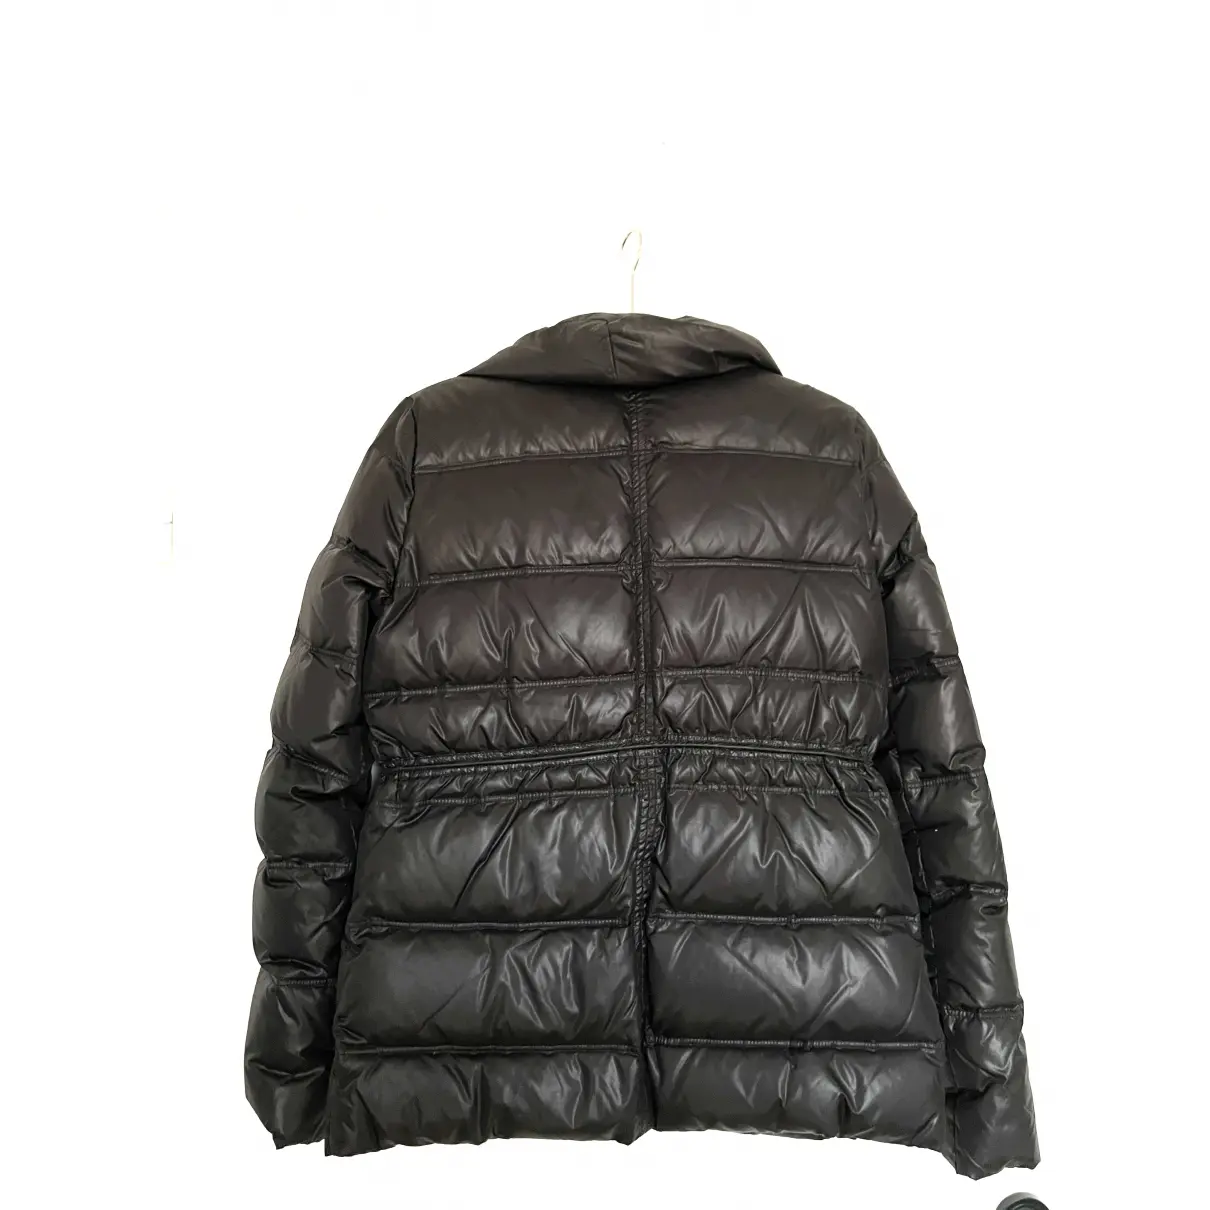 Buy Givenchy Coat online